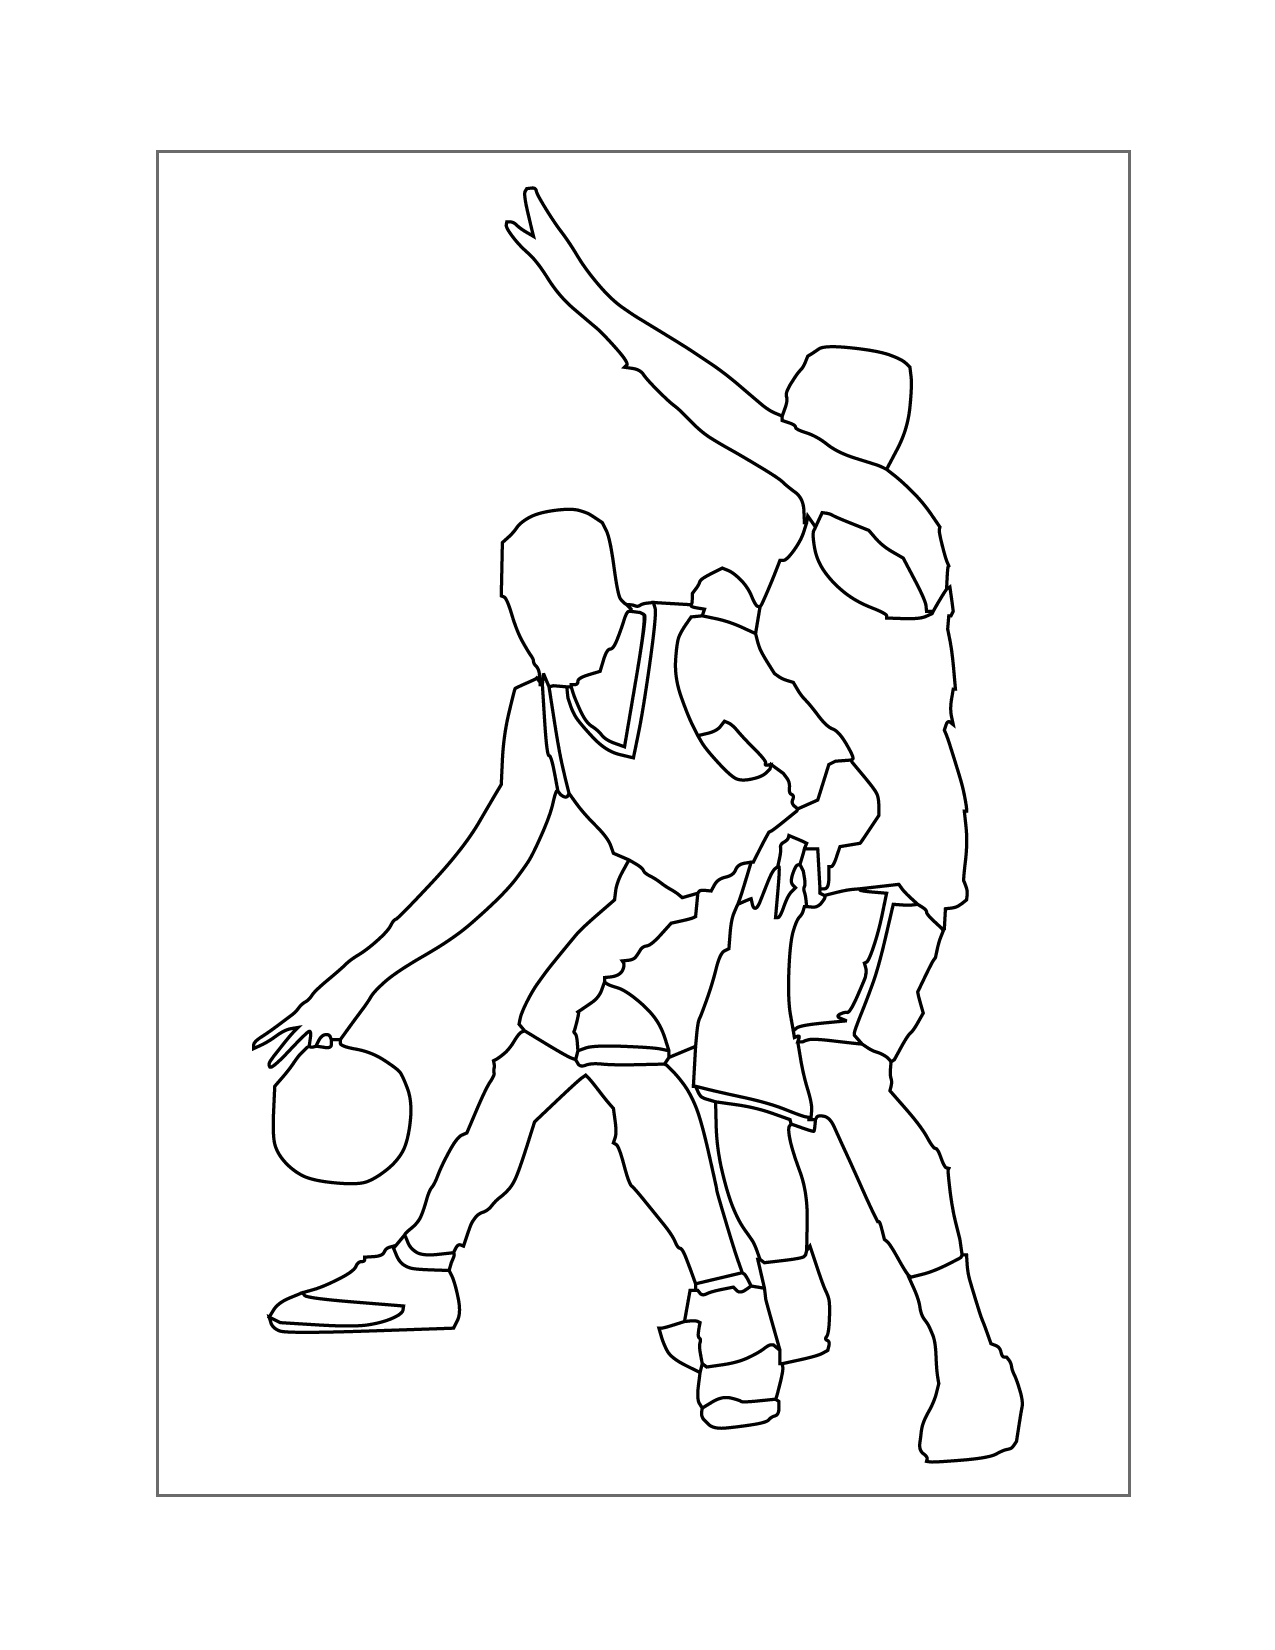 Outline Of Basketball Players For Coloring